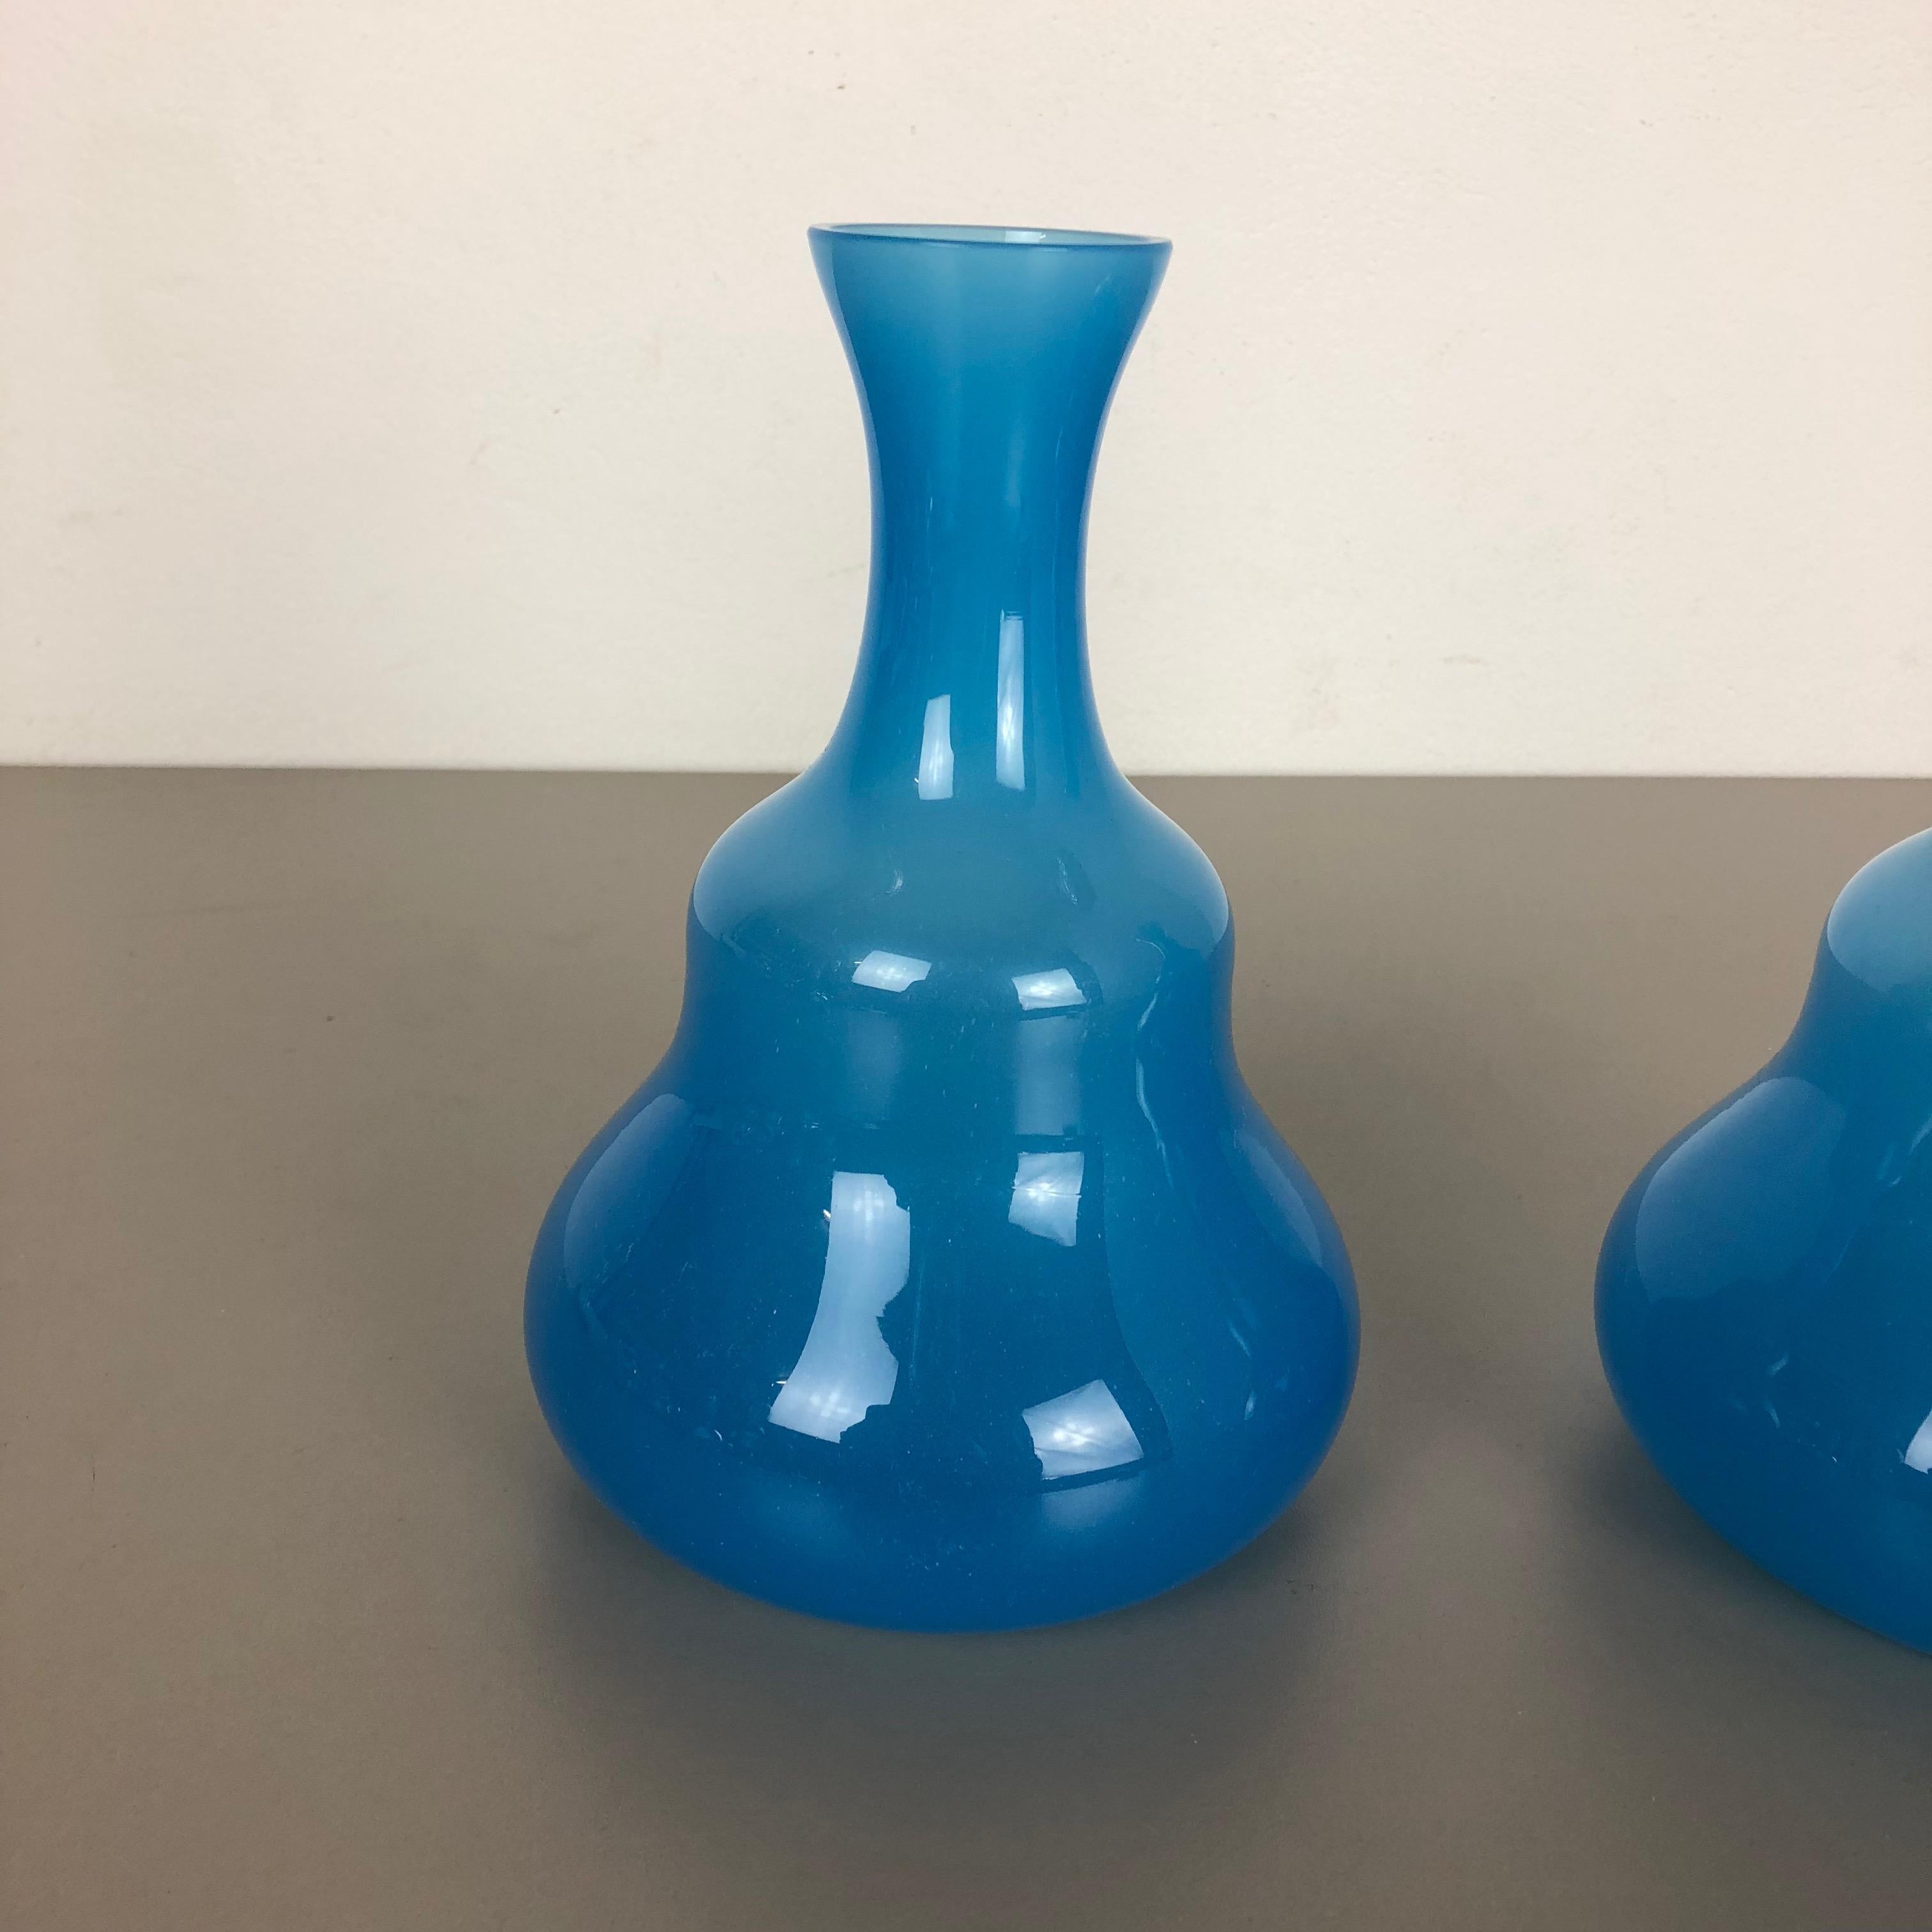 Italian Set of 2 New Old Stock Blue Murano Opaline Glass Vases by Gino Cenedese, 1960s